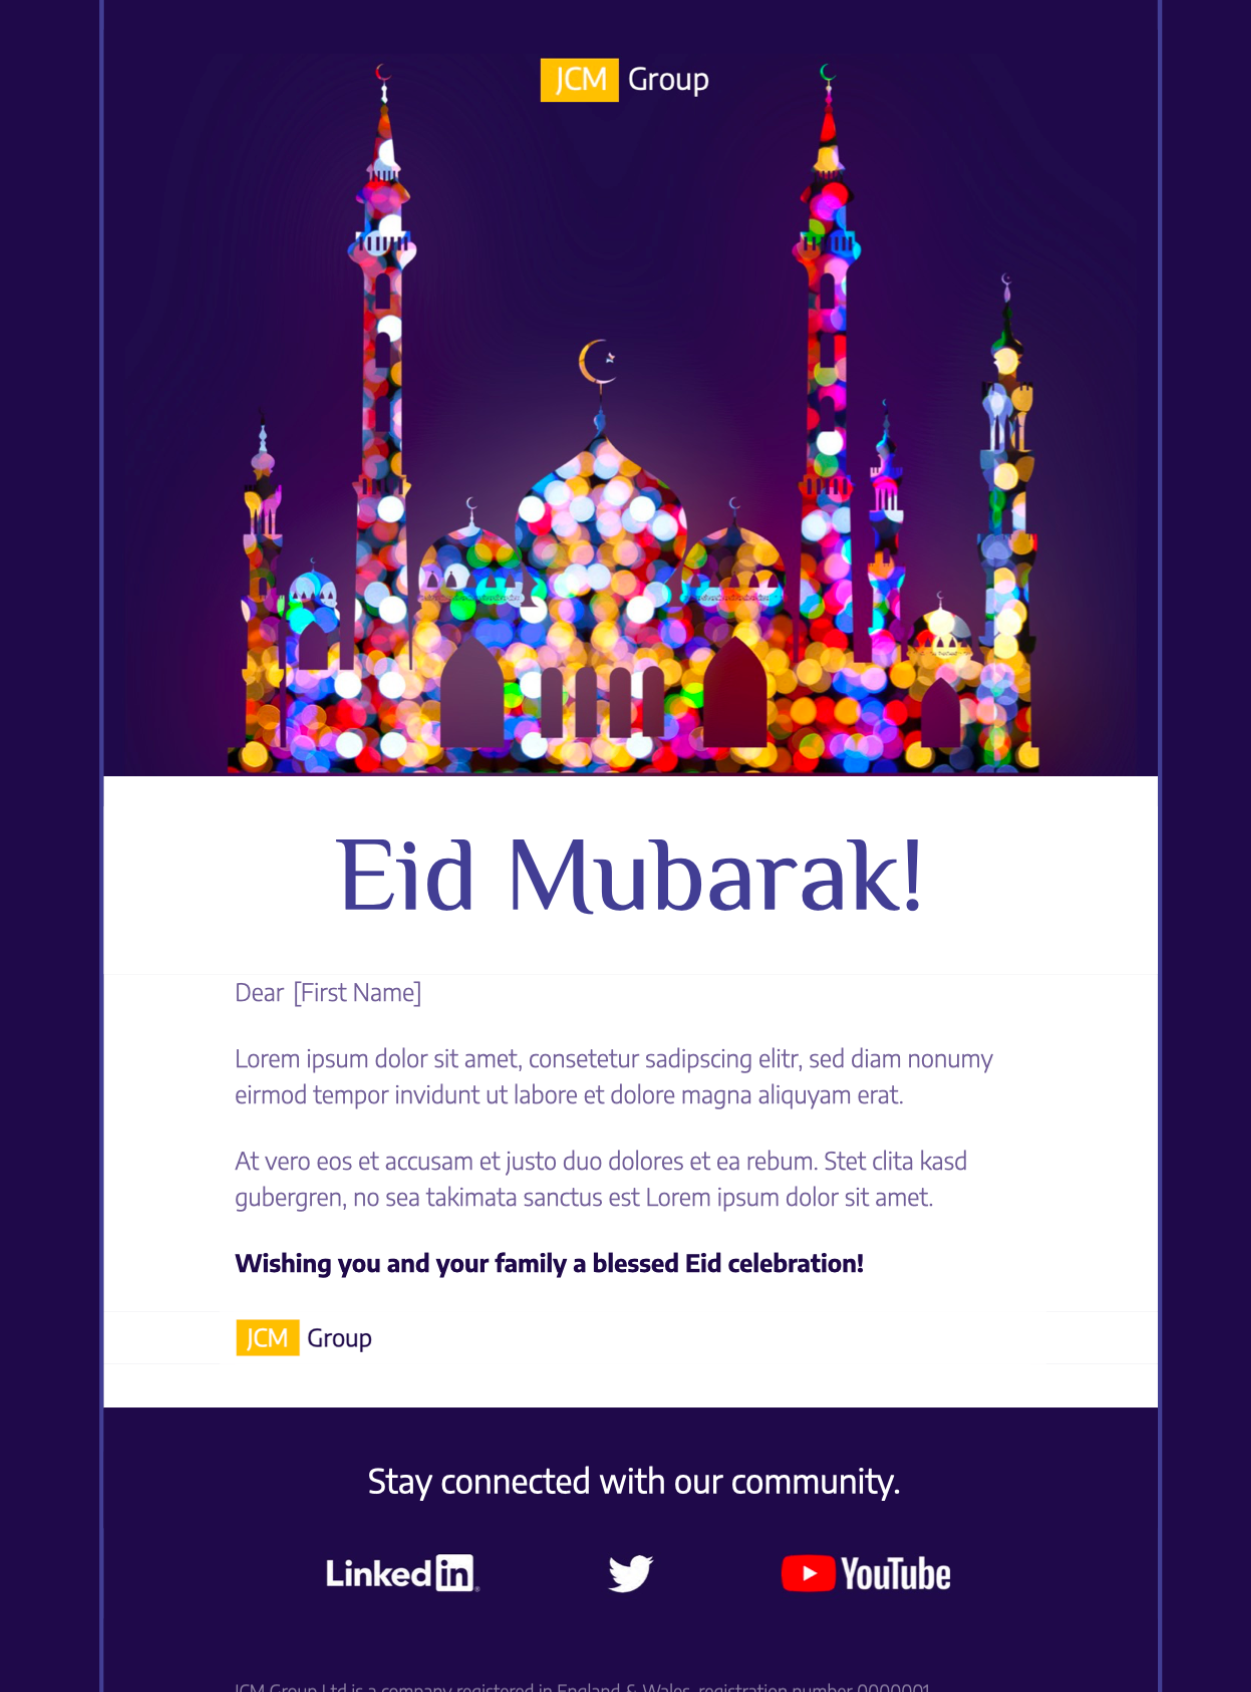 html email template for Eid - exclusively available in mail designer 365